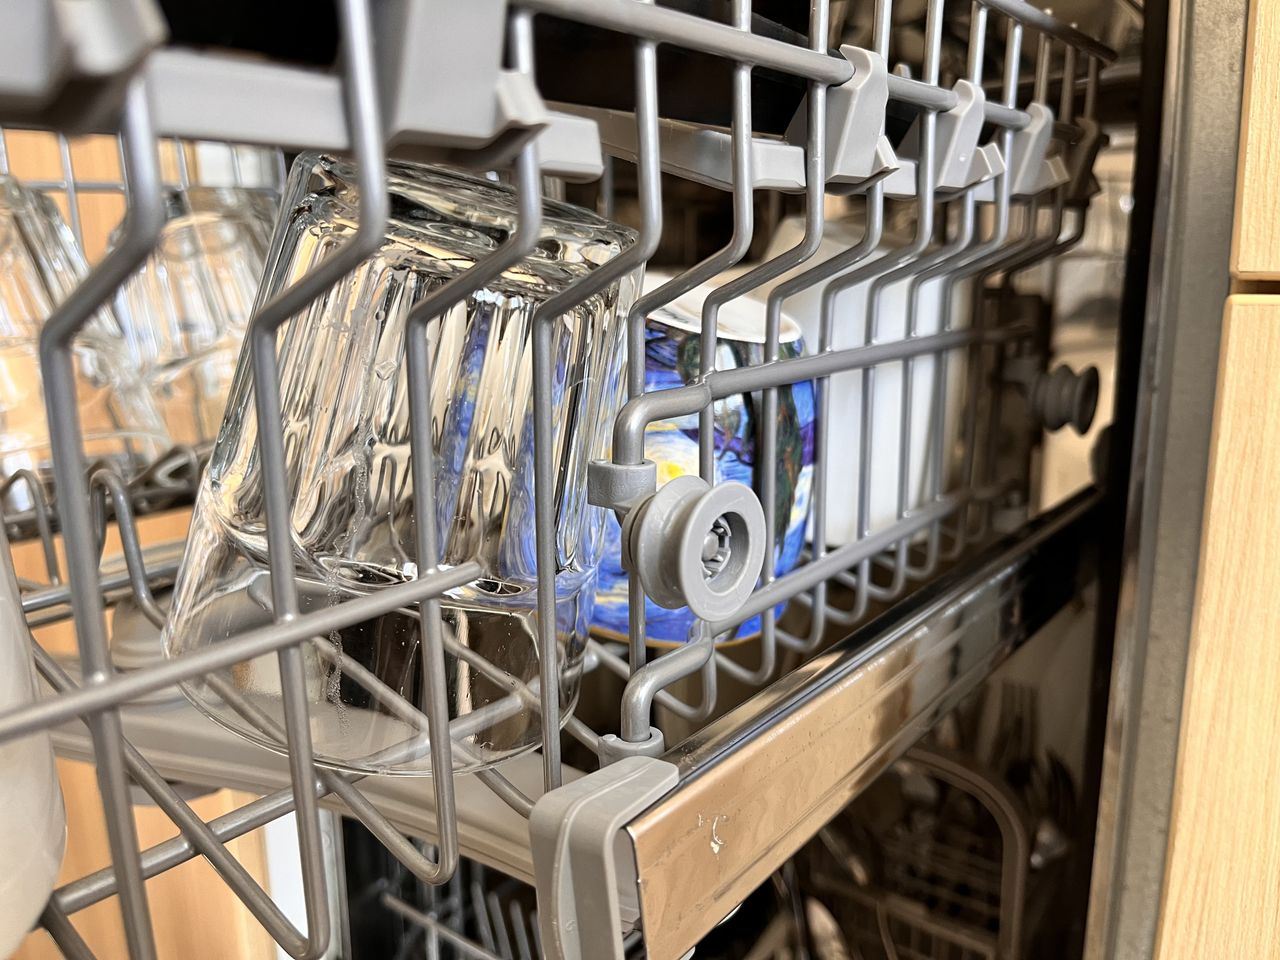 Additional wheels in the dishwasher that will prevent water from settling on the dishes.